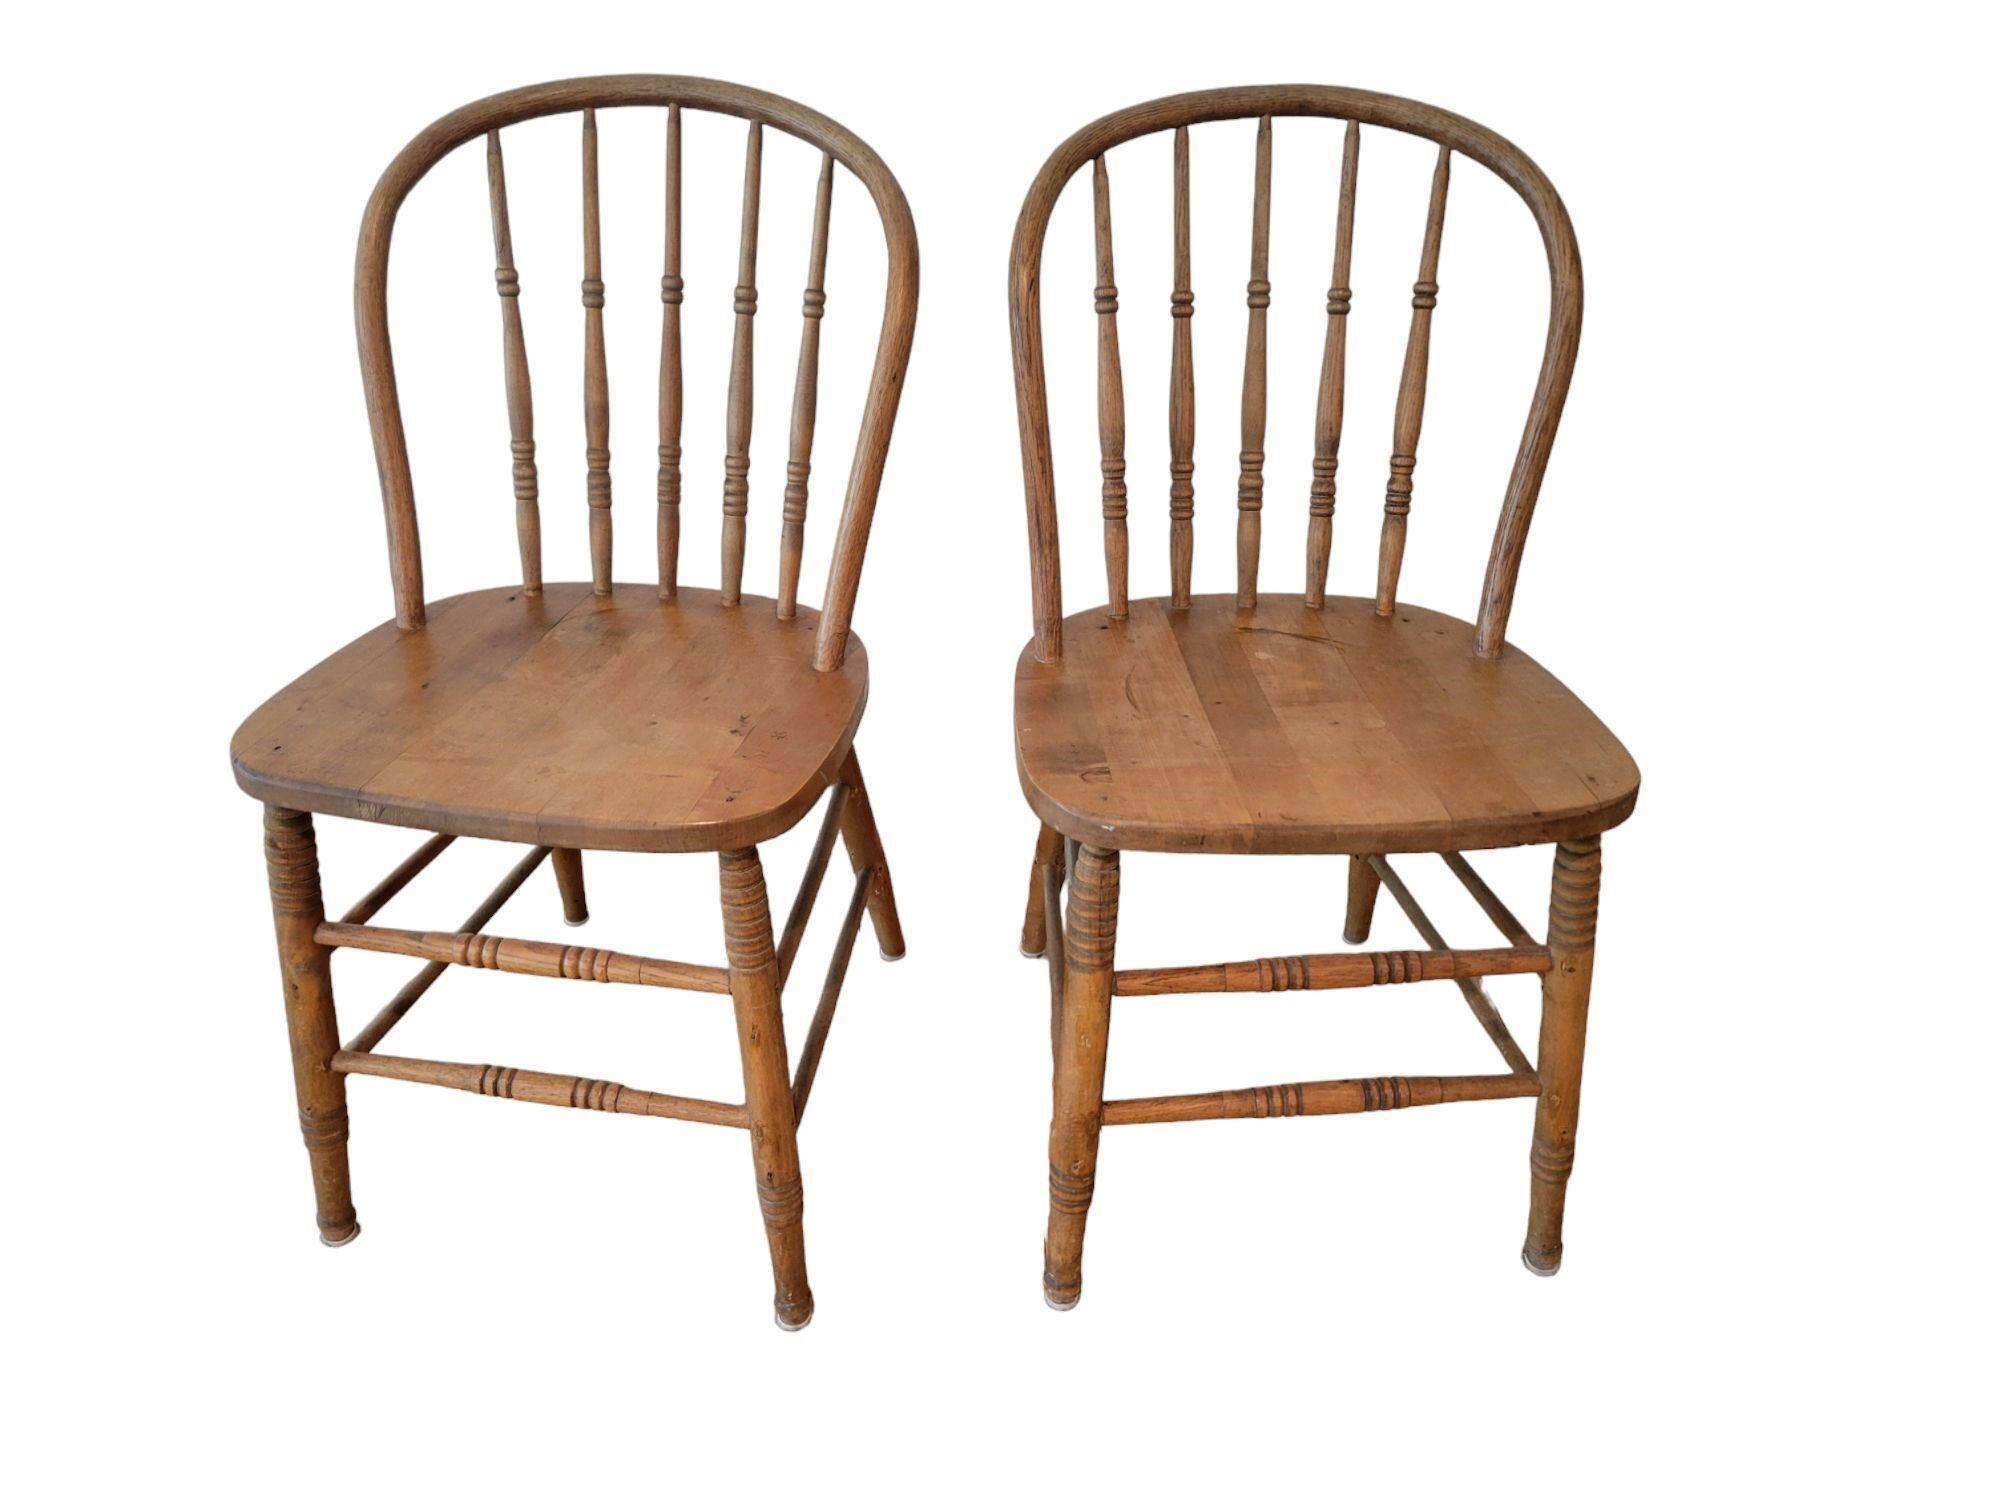 Pair Antique Wooden Chairs